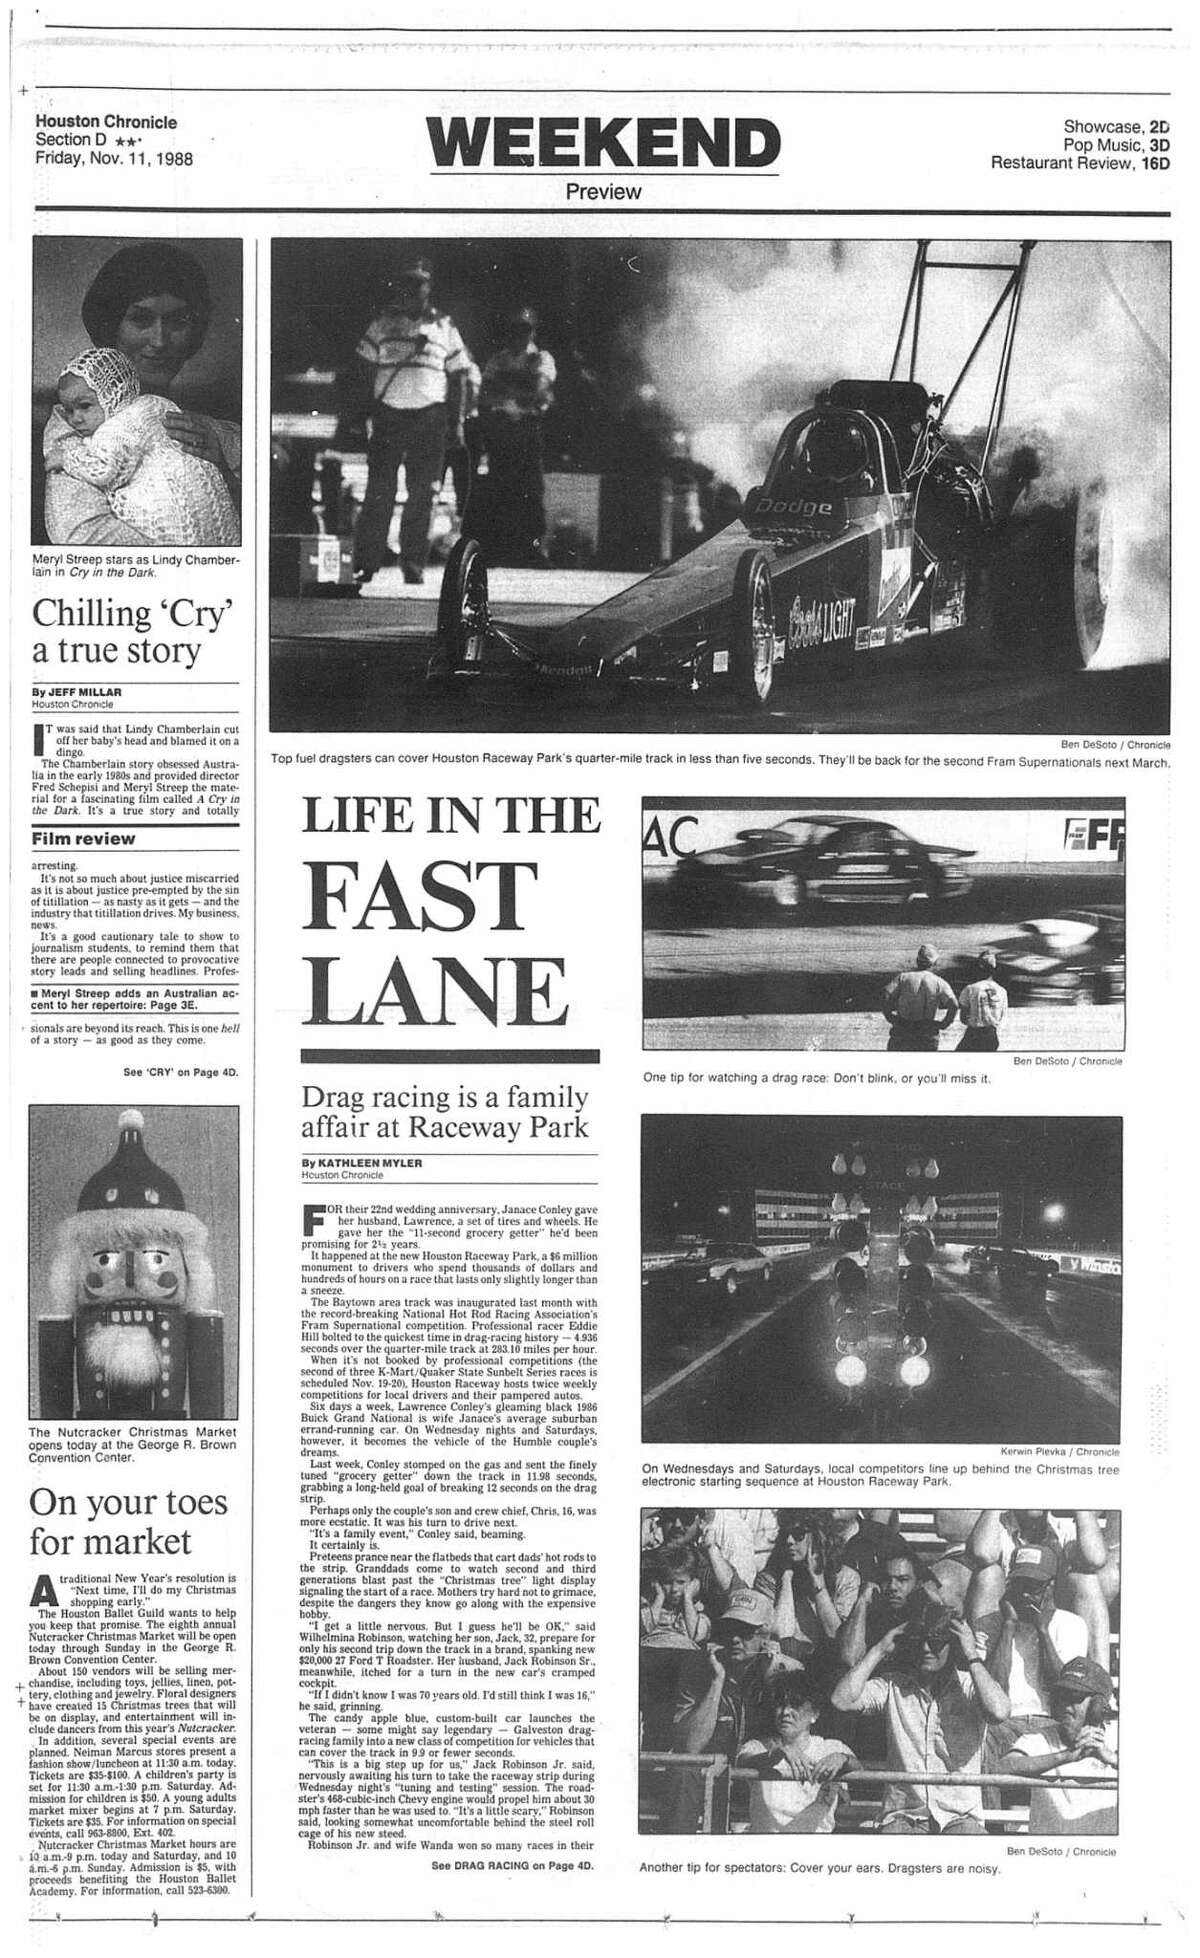 Houston Chronicle inside page - November 11, 1988 - section D, page 1. LIFE IN THE FAST LANE. Drag racing is a family affair at Raceway Park